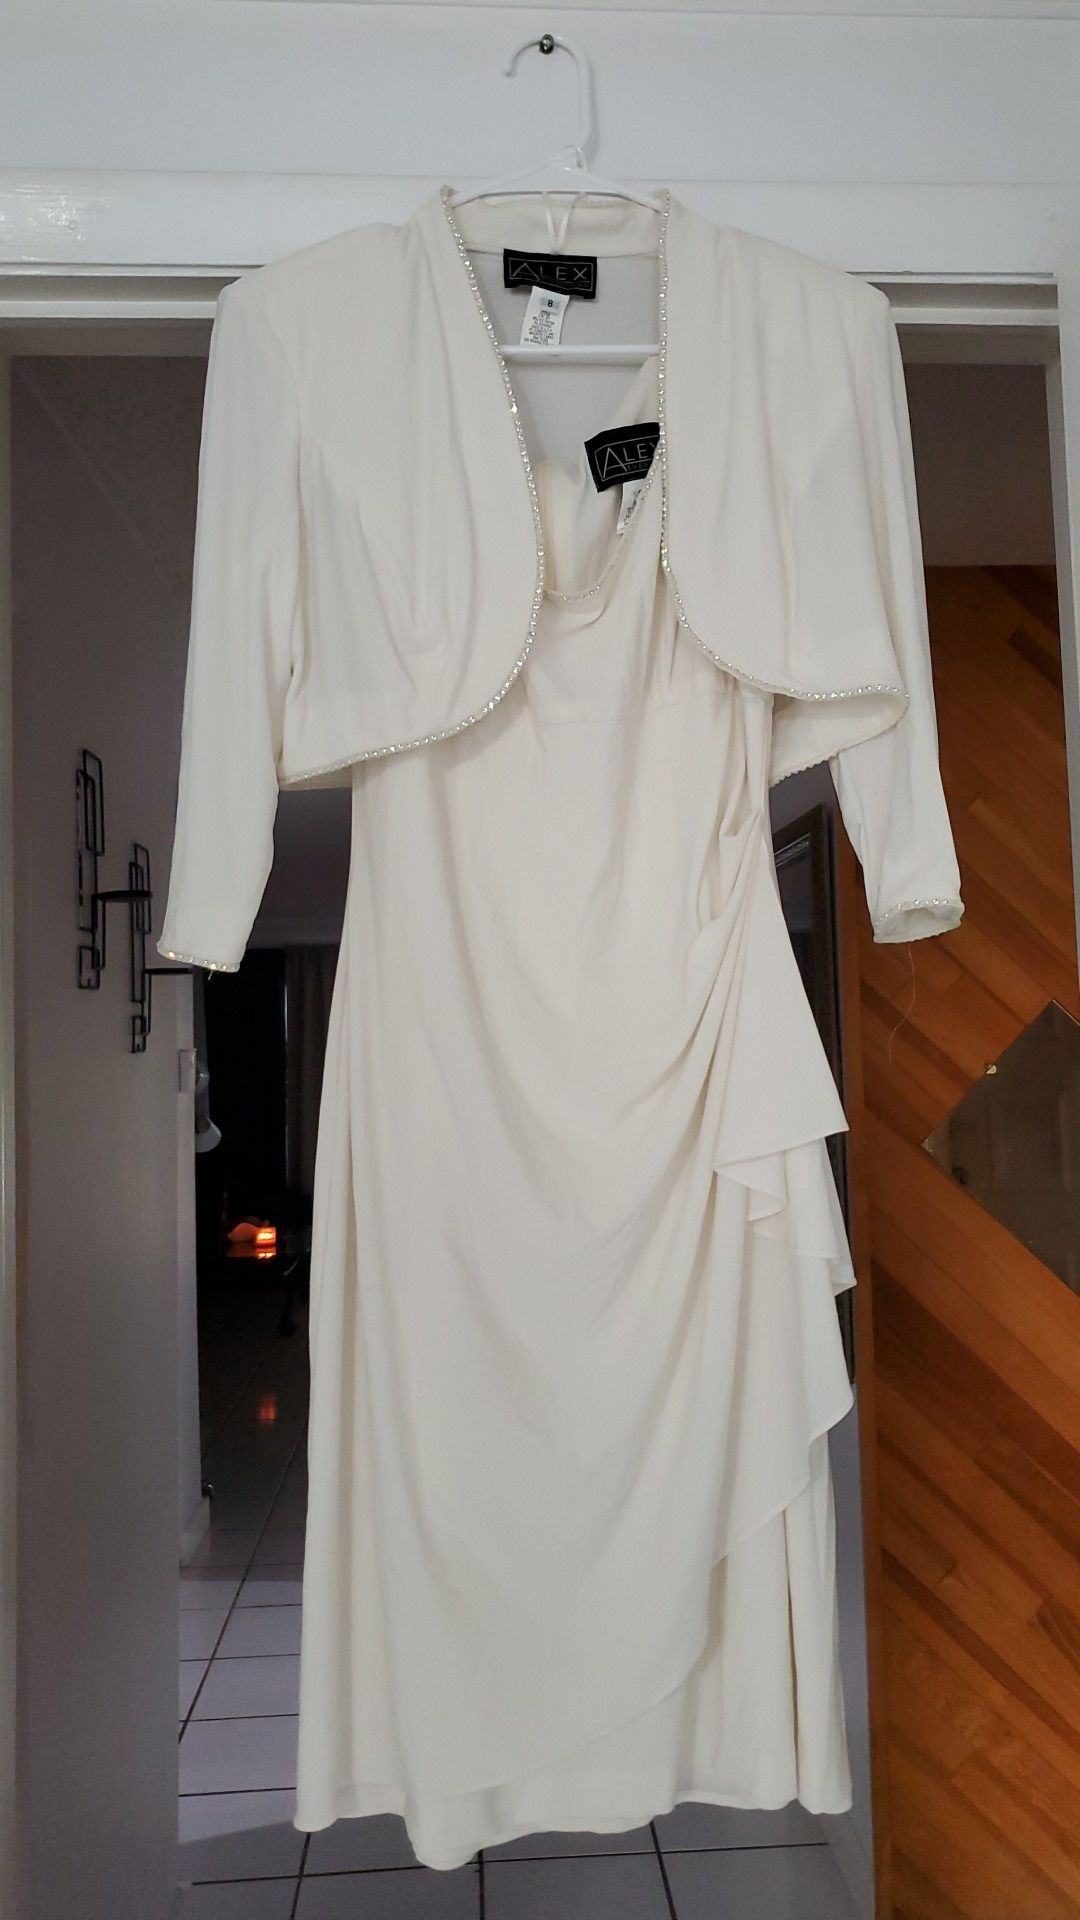 Off white color Gown, Size medium, with matching jacket, beading trim on neckline of gown and jacket.